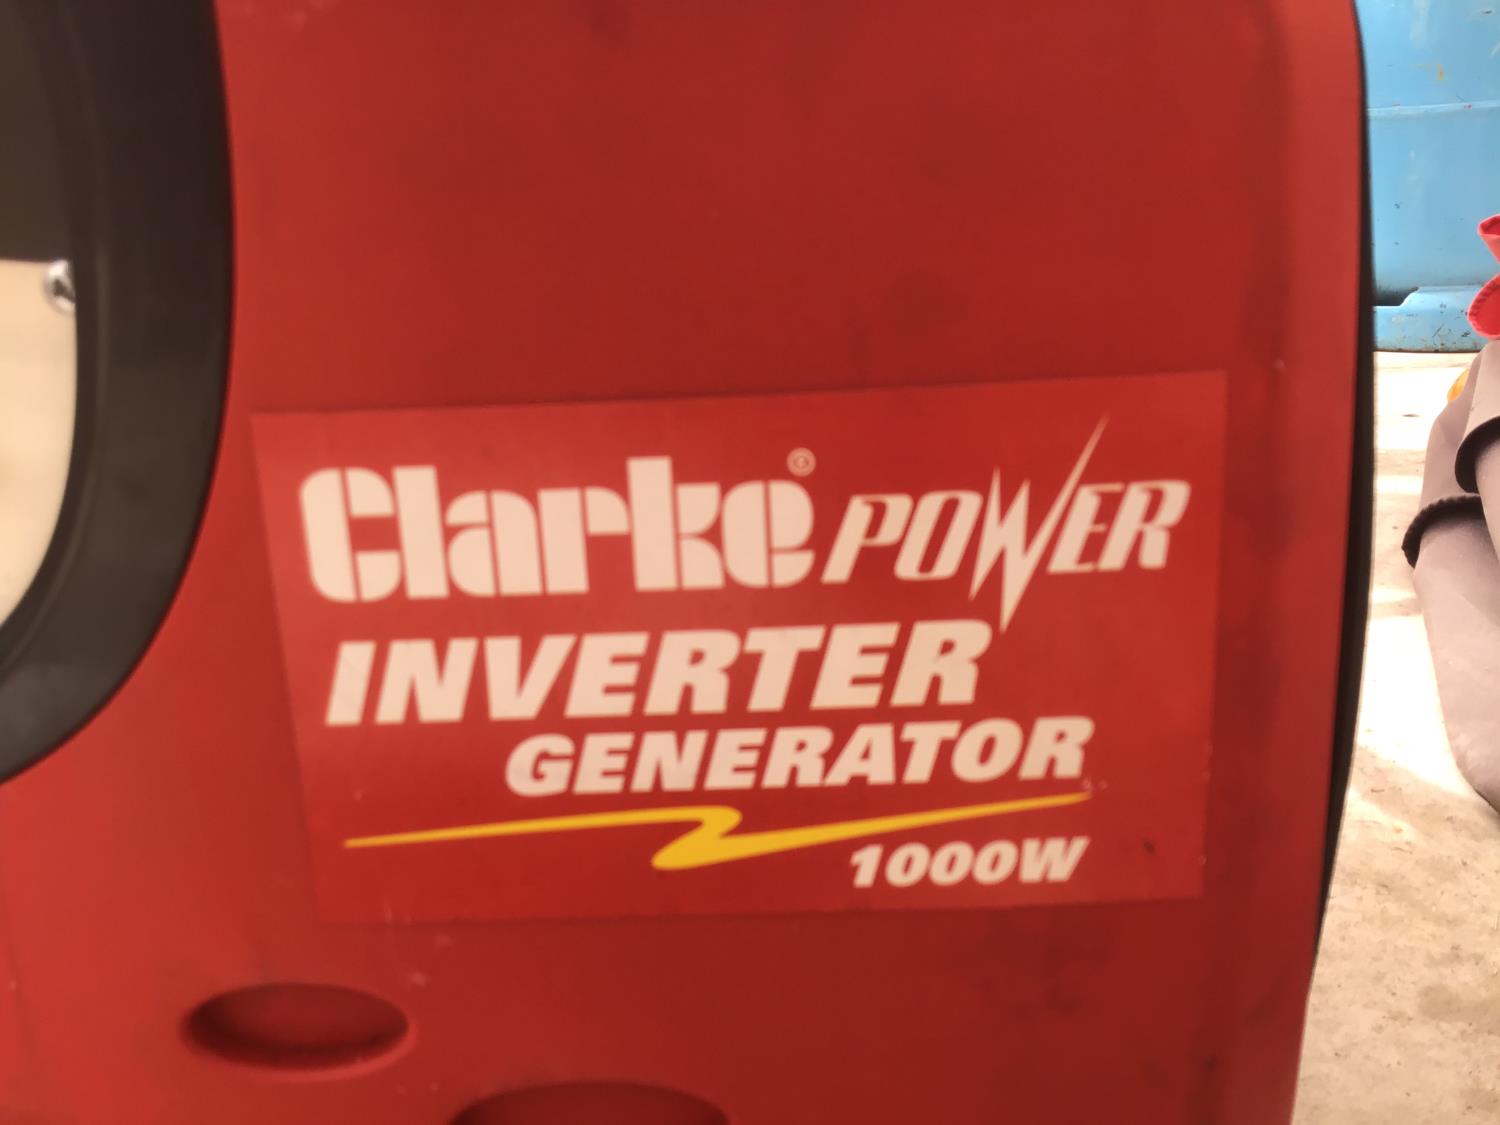 A CLARKE POWER INVERTOR GENERATOR 1000W, RECENTLY SERVICED AND IN WORKING ORDER - Image 2 of 2